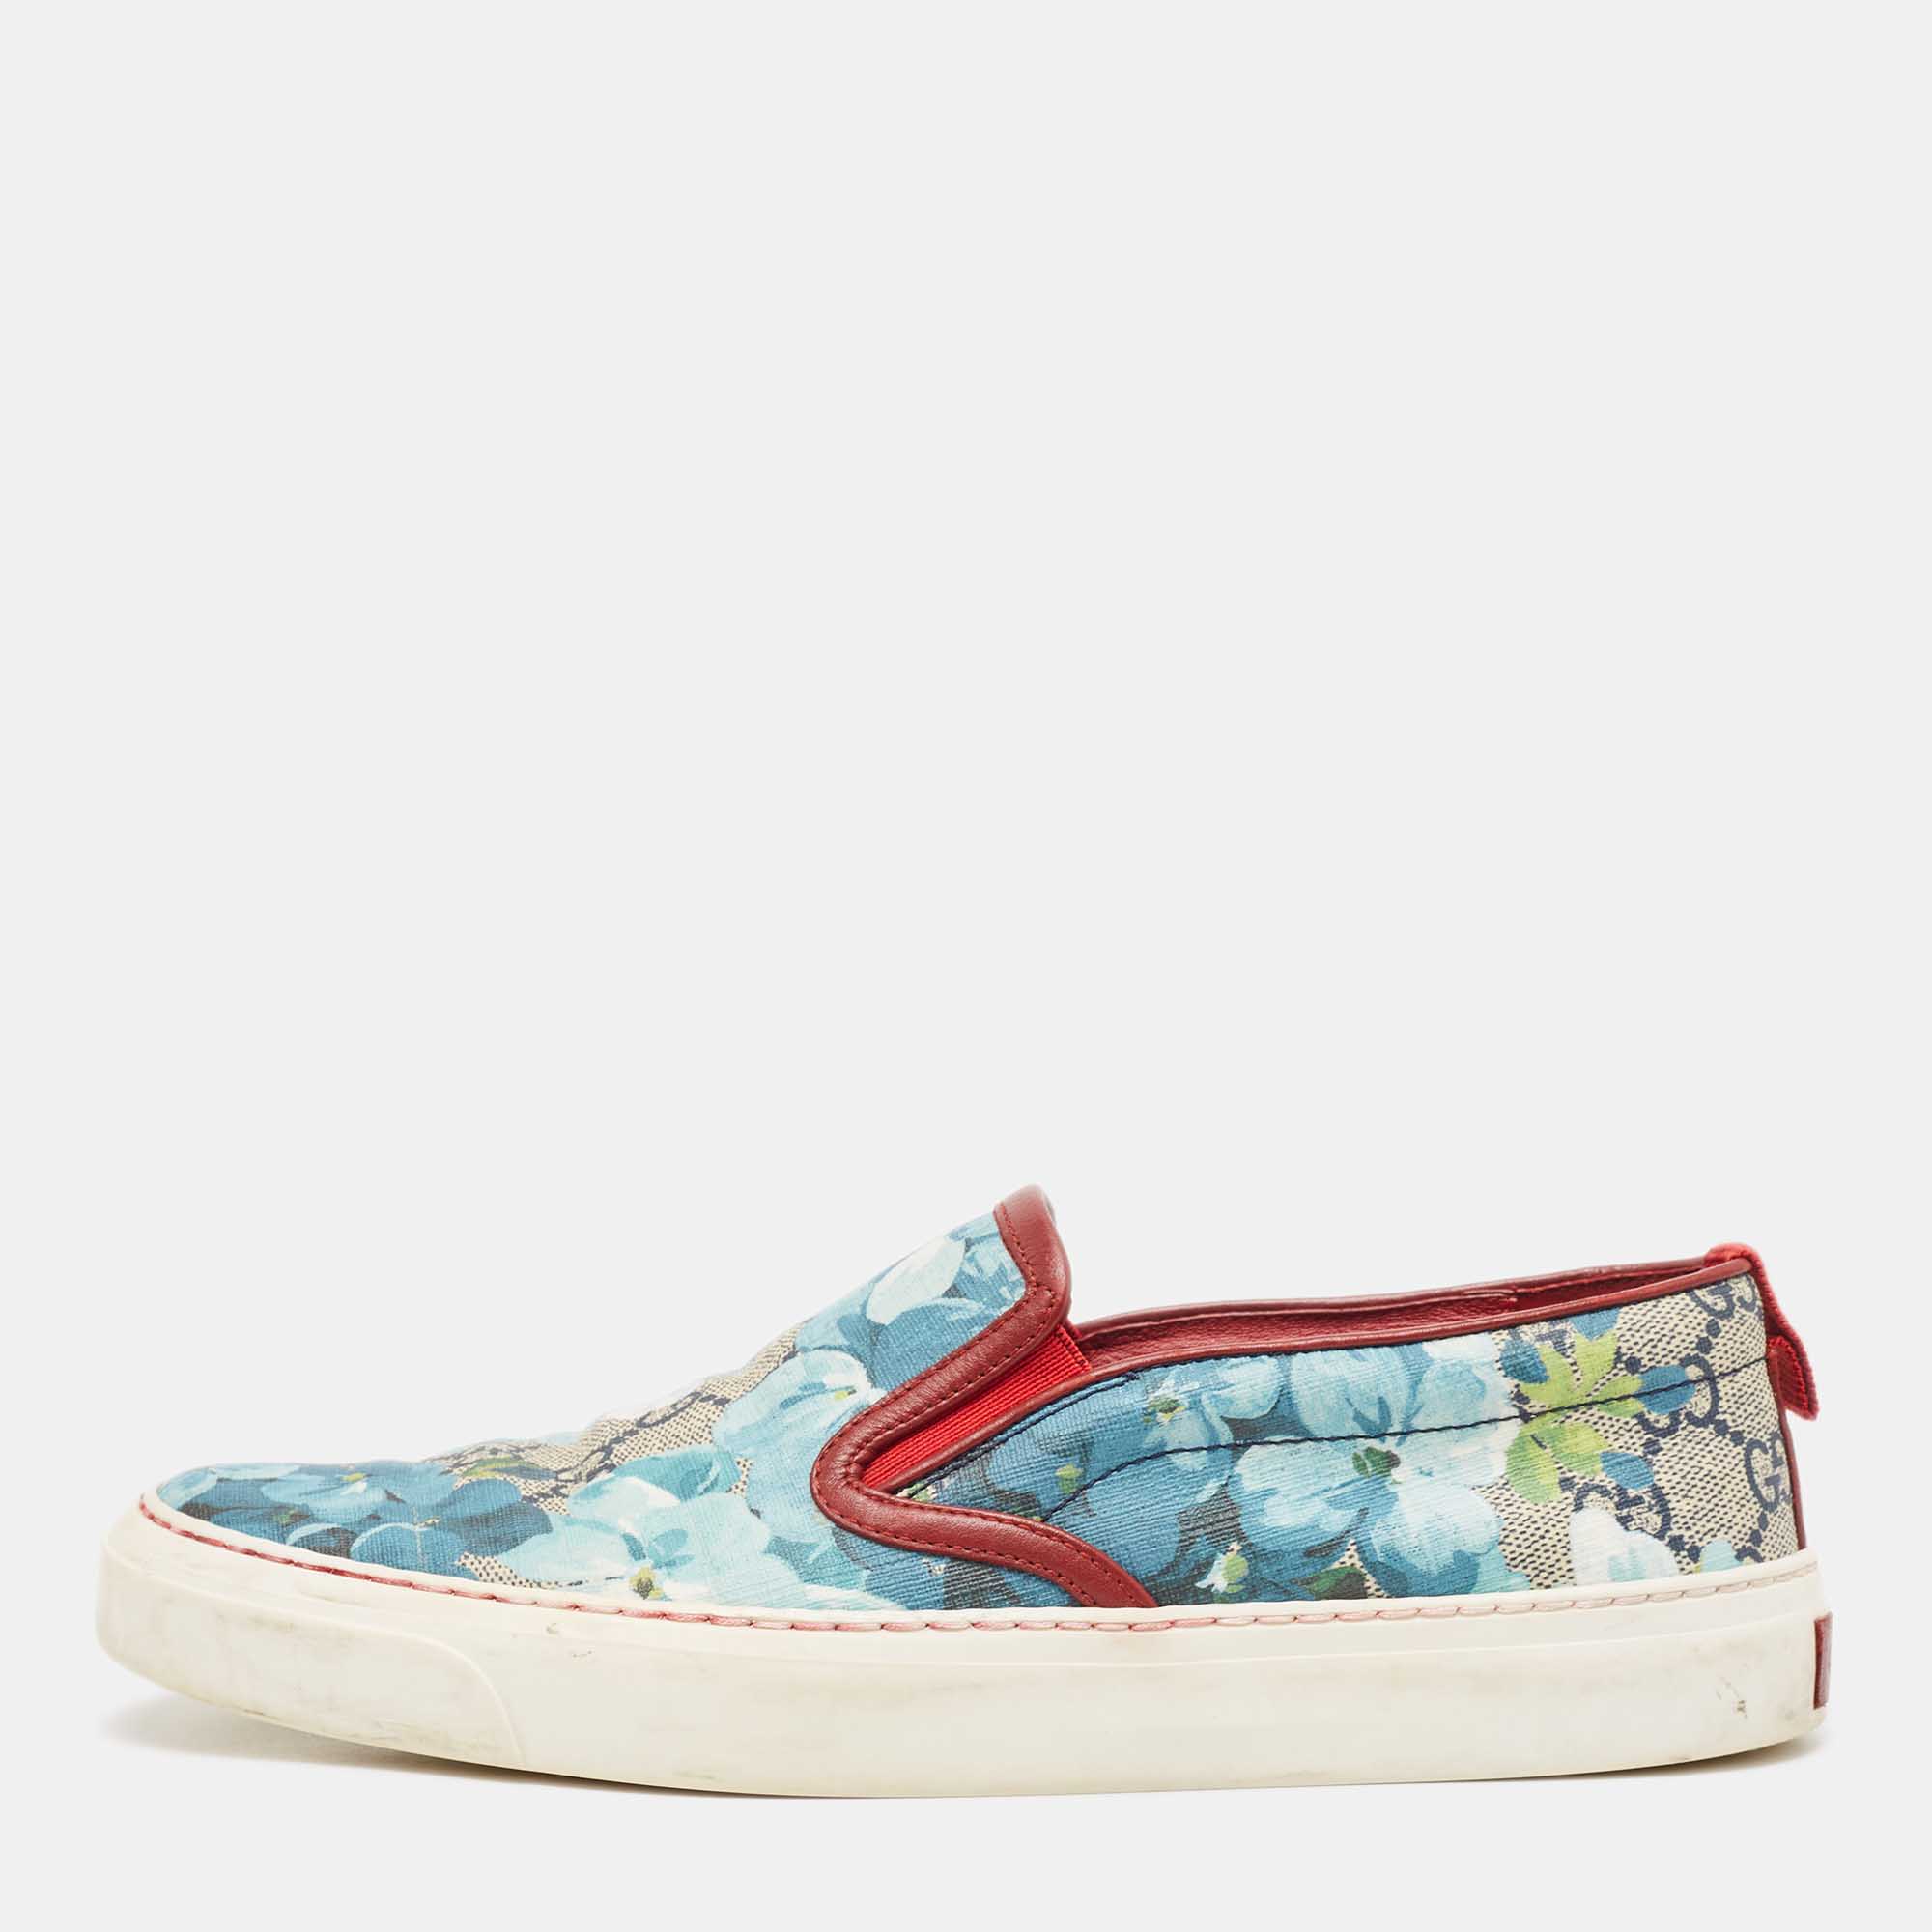 

Gucci Multicolor GG Supreme Blooms Printed Canvas Slip On Sneakers Size